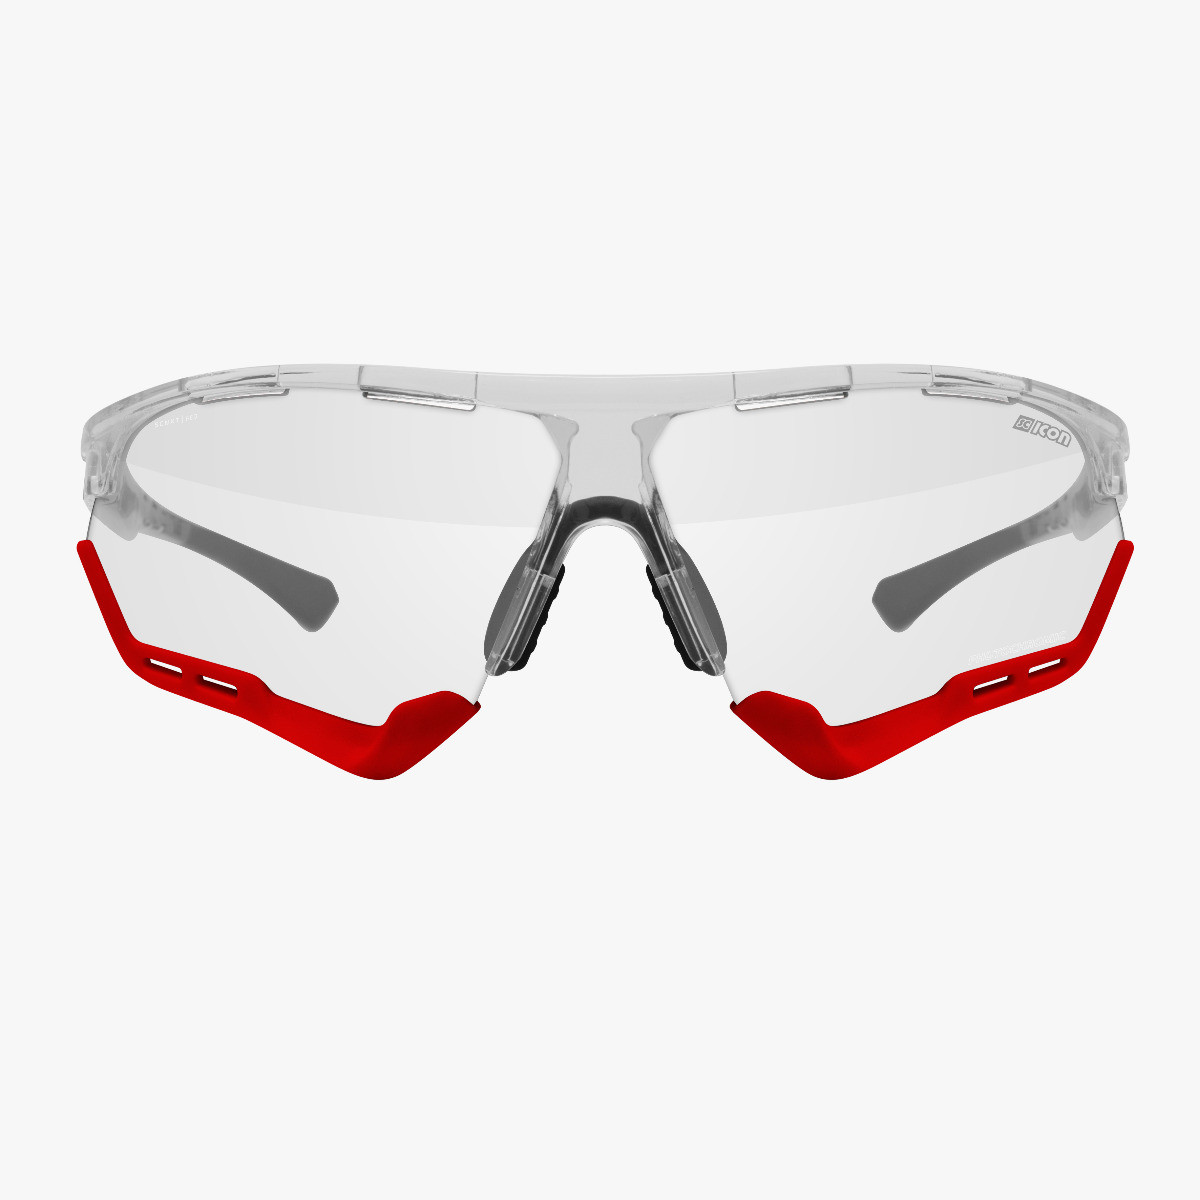 Aerocomfort cycling sunglasses scnxt photochromic crystal frame red lenses EY19160703
